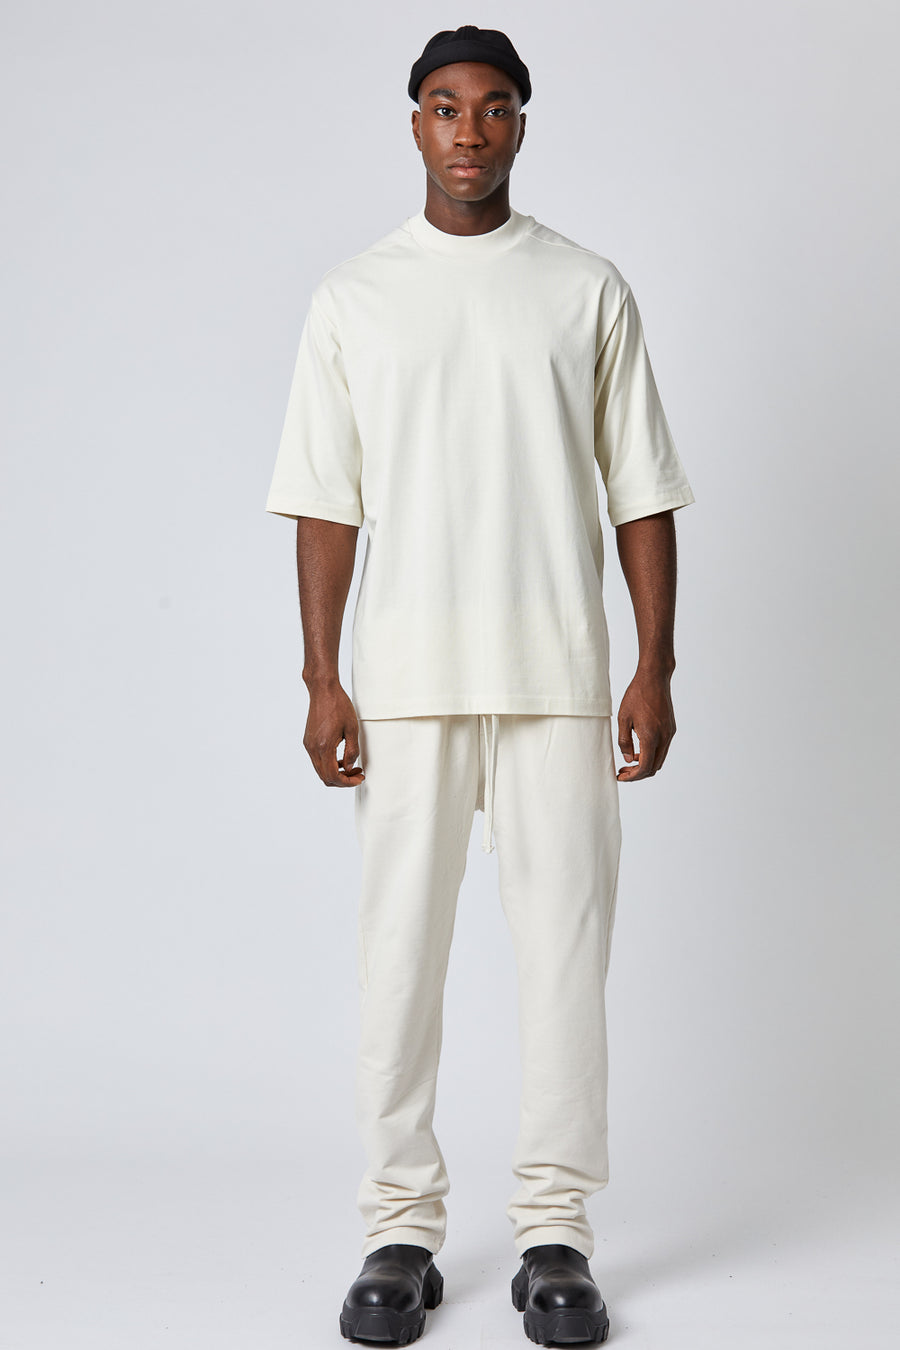 Buy the Thom Krom M TS 682 in Off White at Intro. Spend £50 for free UK delivery. Official stockists. We ship worldwide.